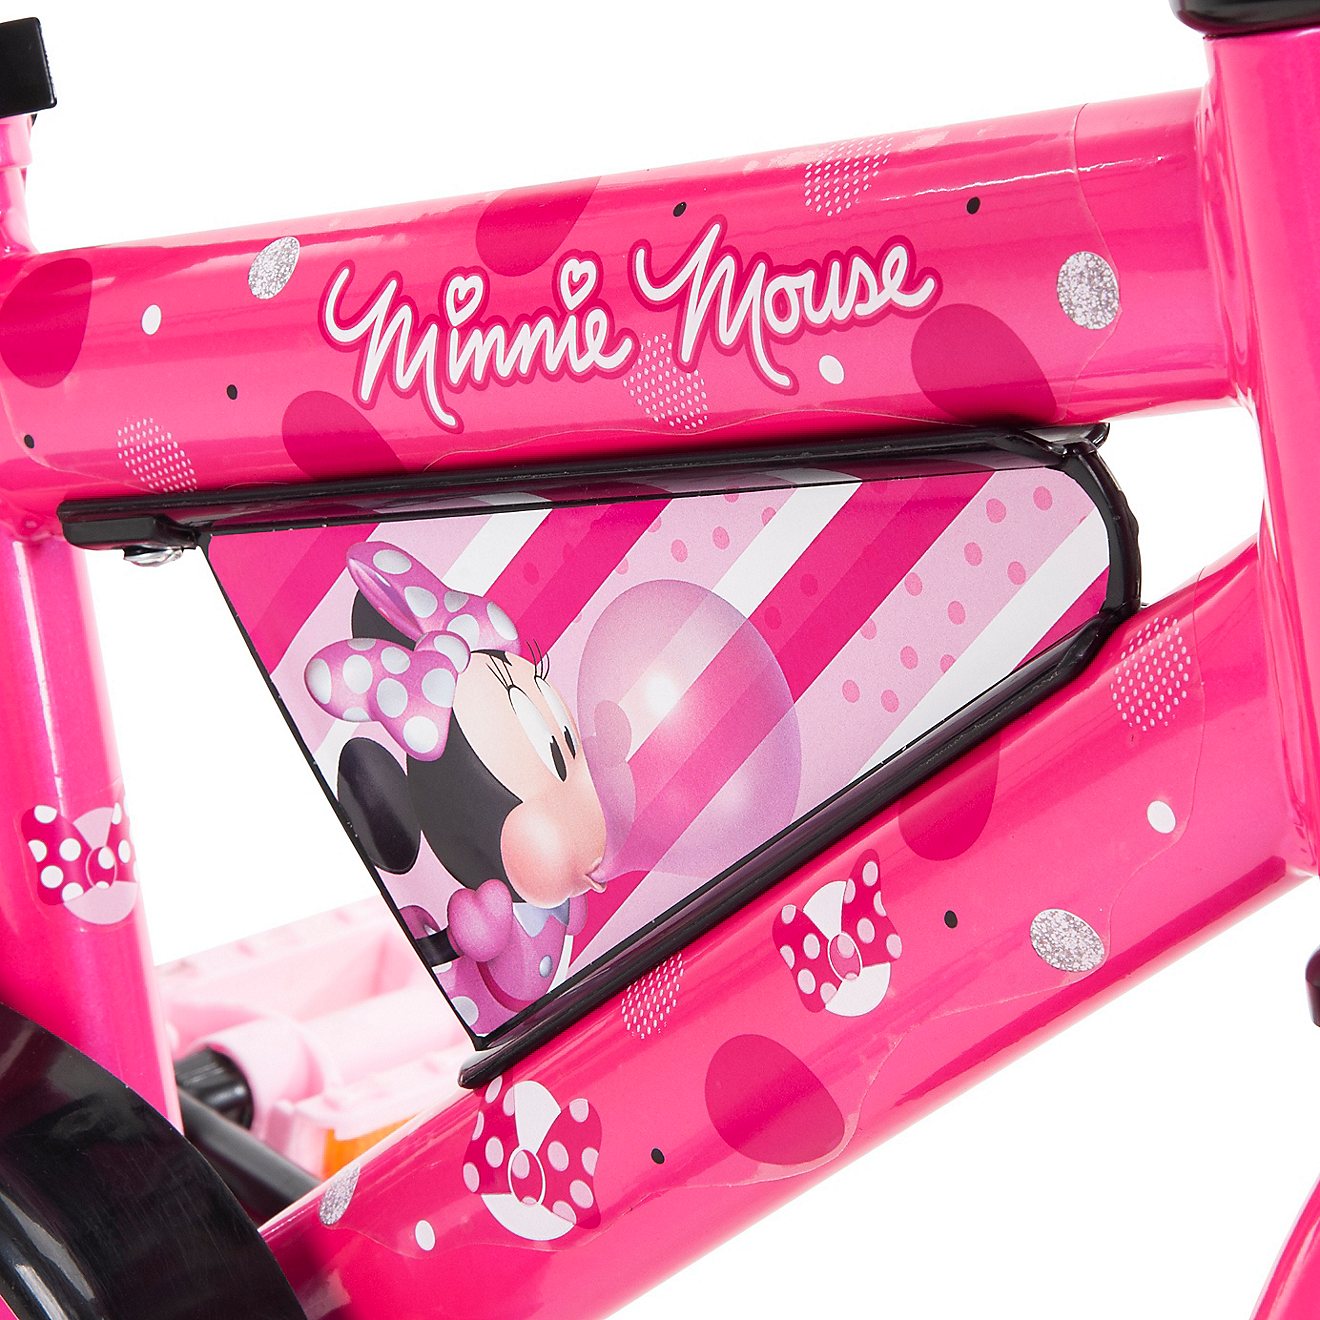 Huffy Girls' Minnie Mouse 12 in Bike                                                                                             - view number 7